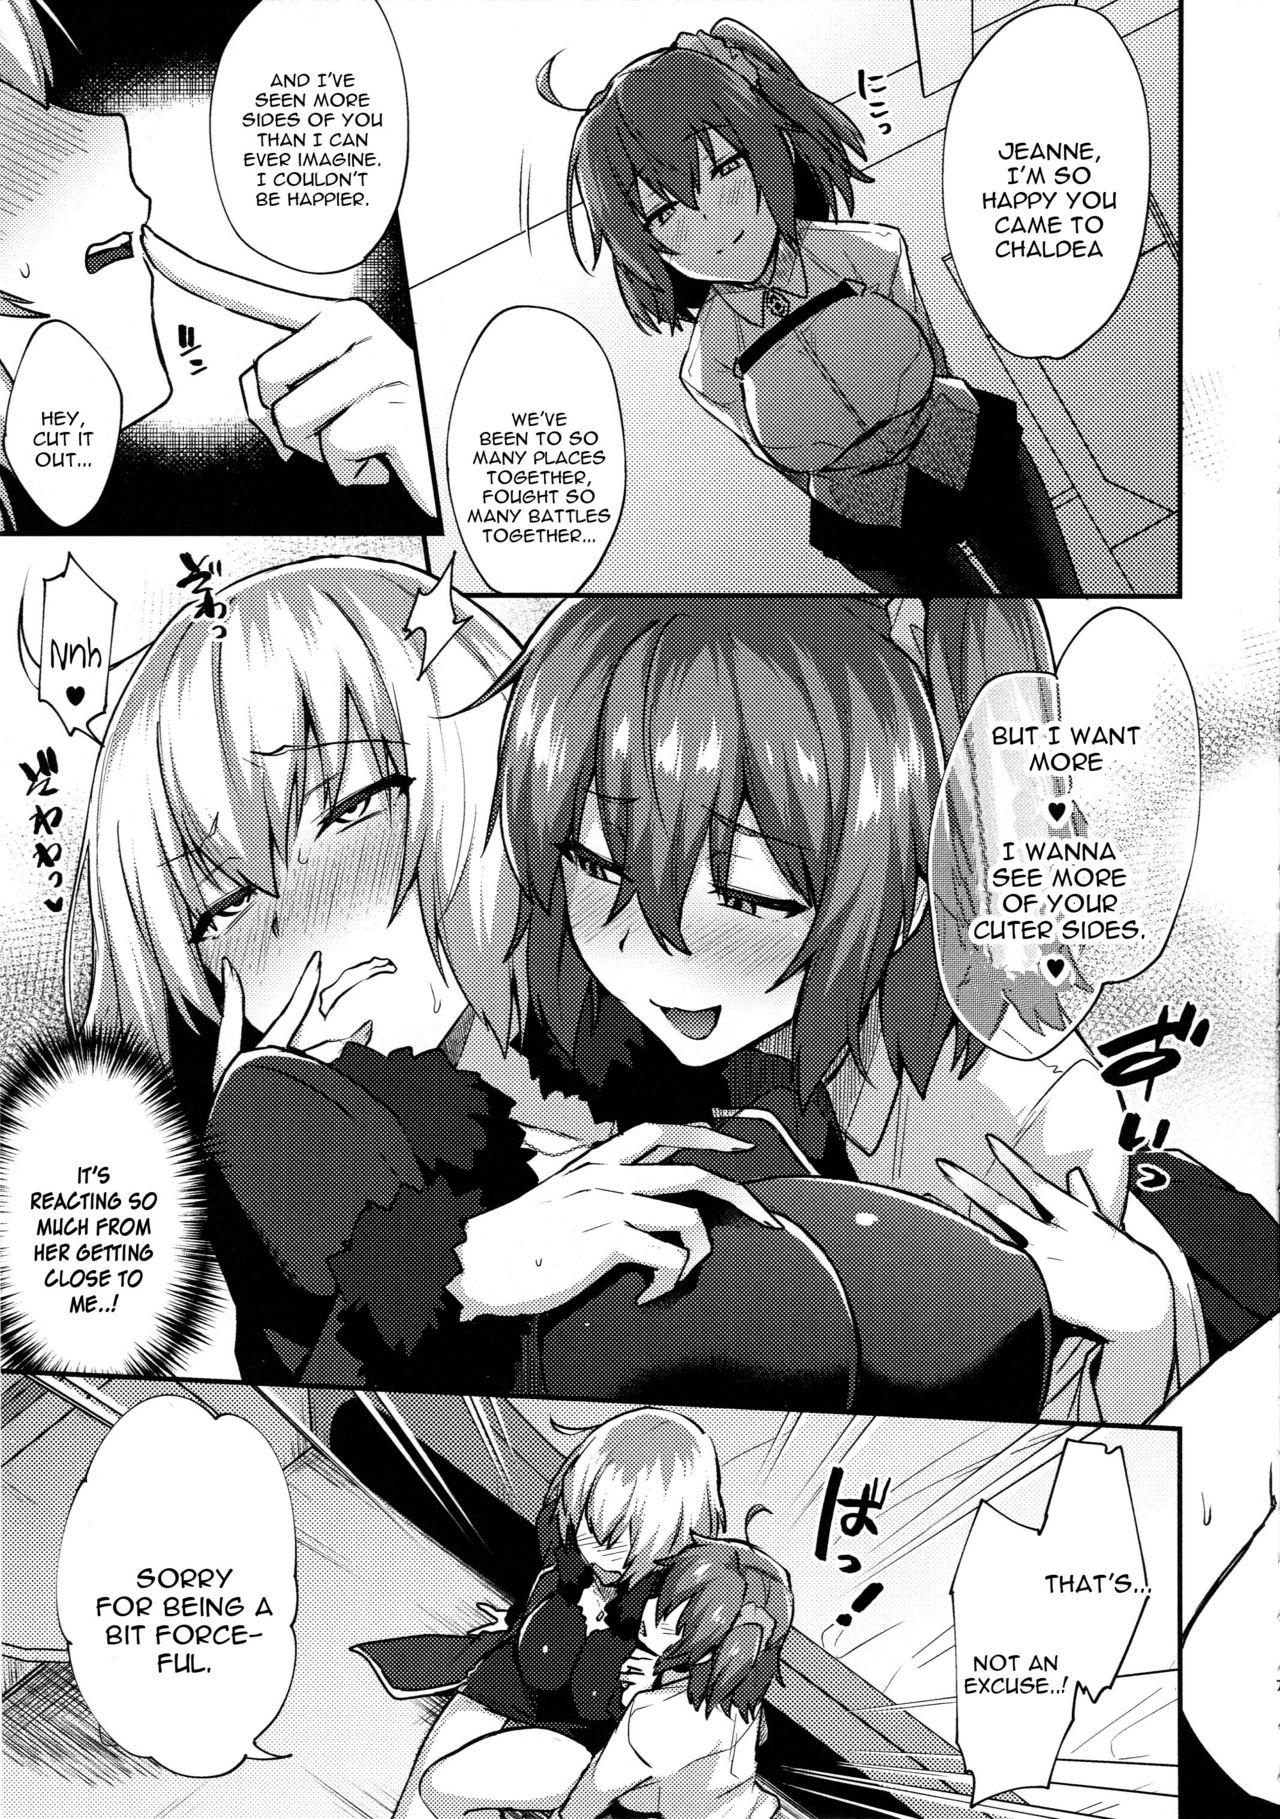 Futa Zettai Haiboku Jeanne-chan!! - Fate grand order Old And Young - Page 6